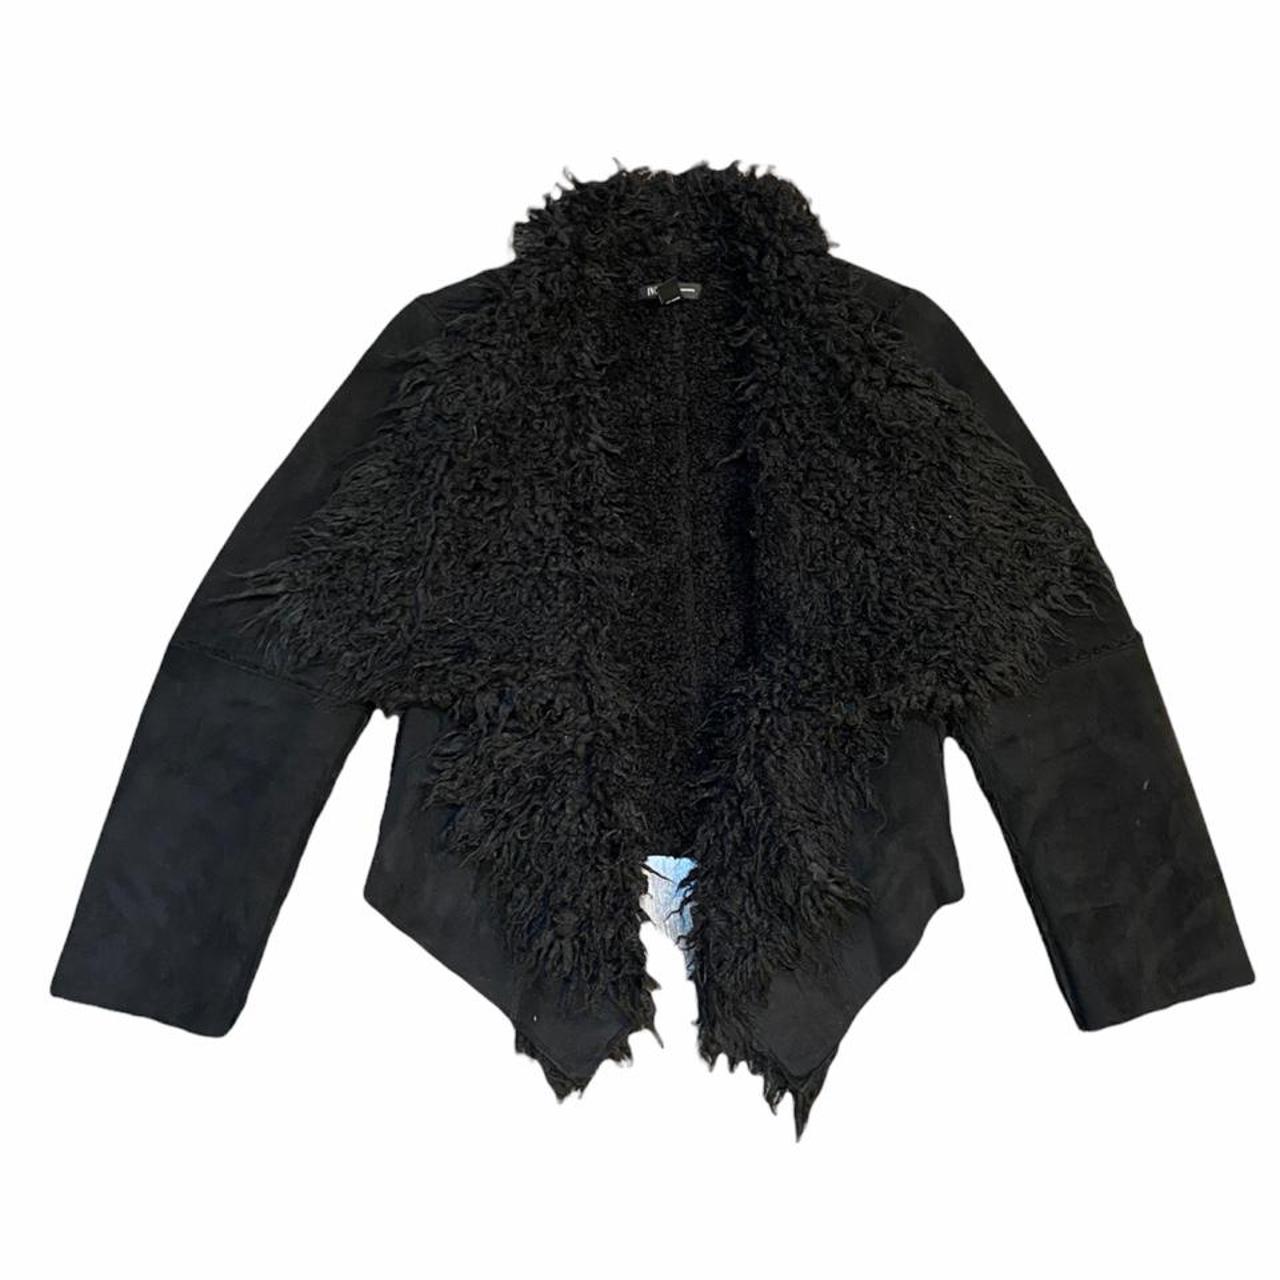 ON HOLDy2k black afghan coat with faux fur by... - Depop